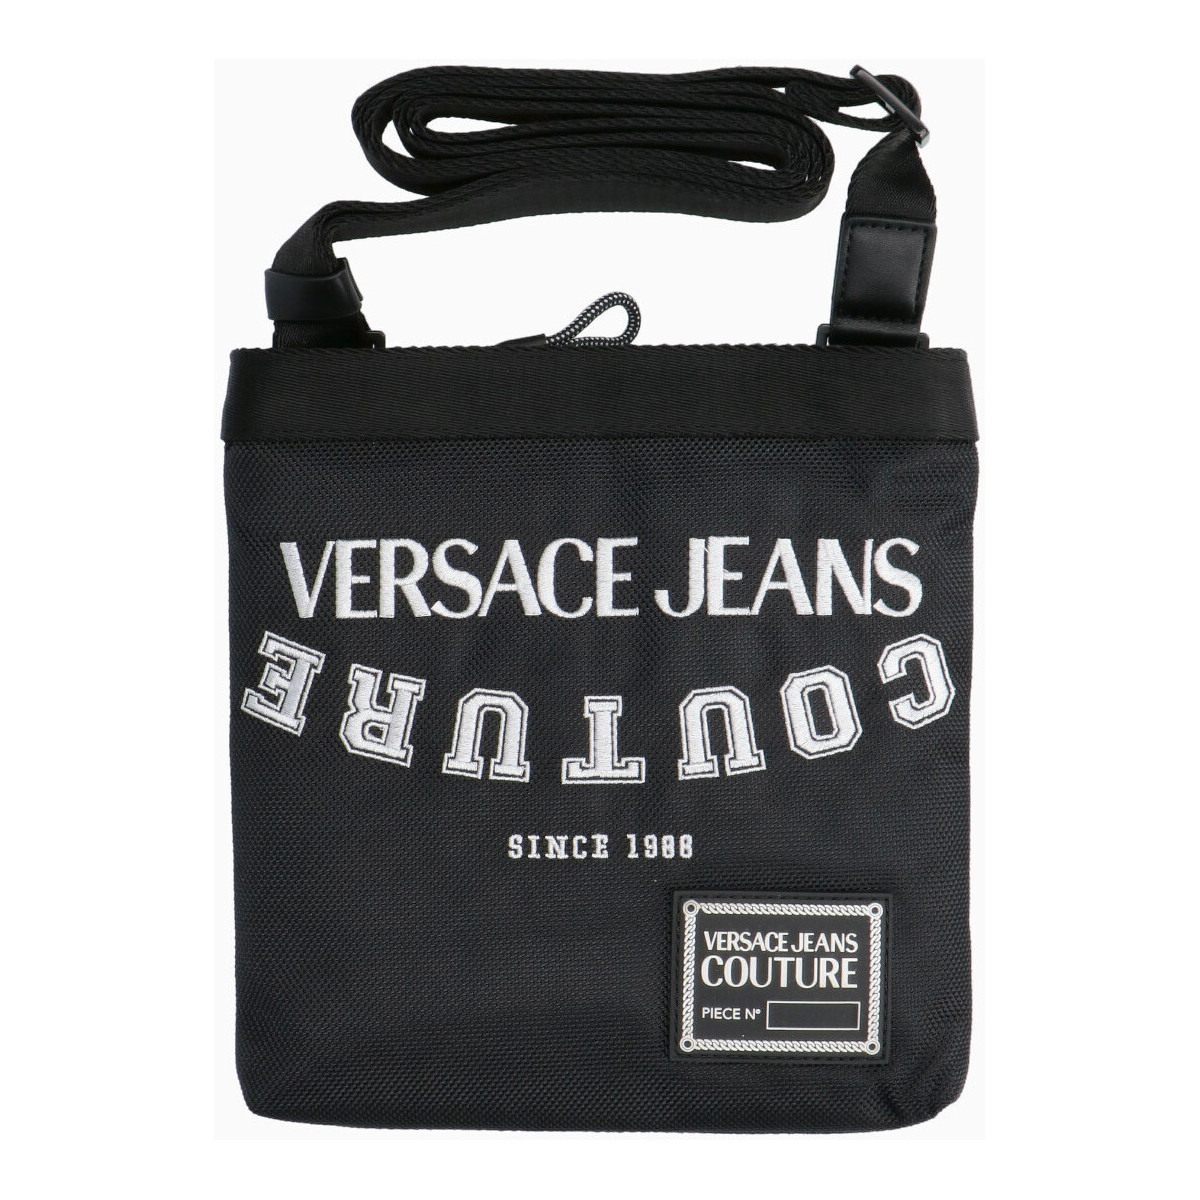 Versace Jeans Couture Tracolla Uomo 3HzLiTfE